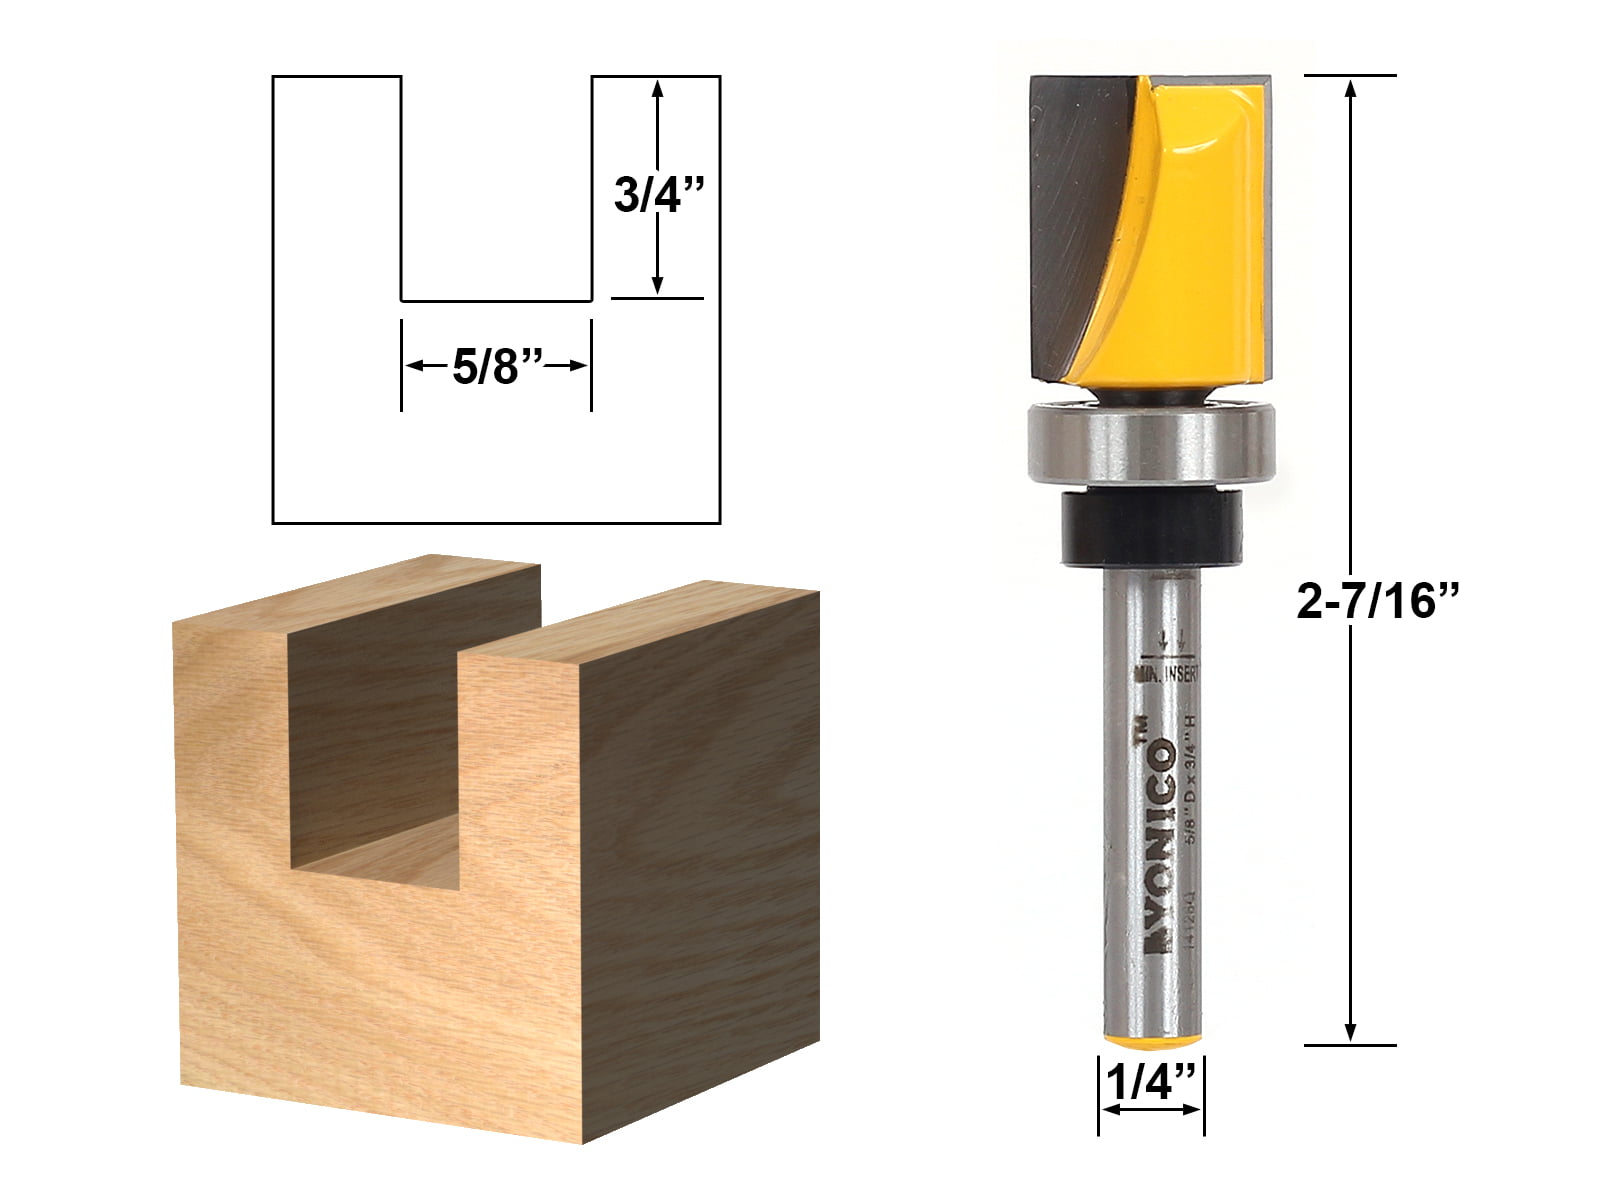 Flush Trim/Template Router Bit with Shank Bearing 5/8" x 3/4" Yonico